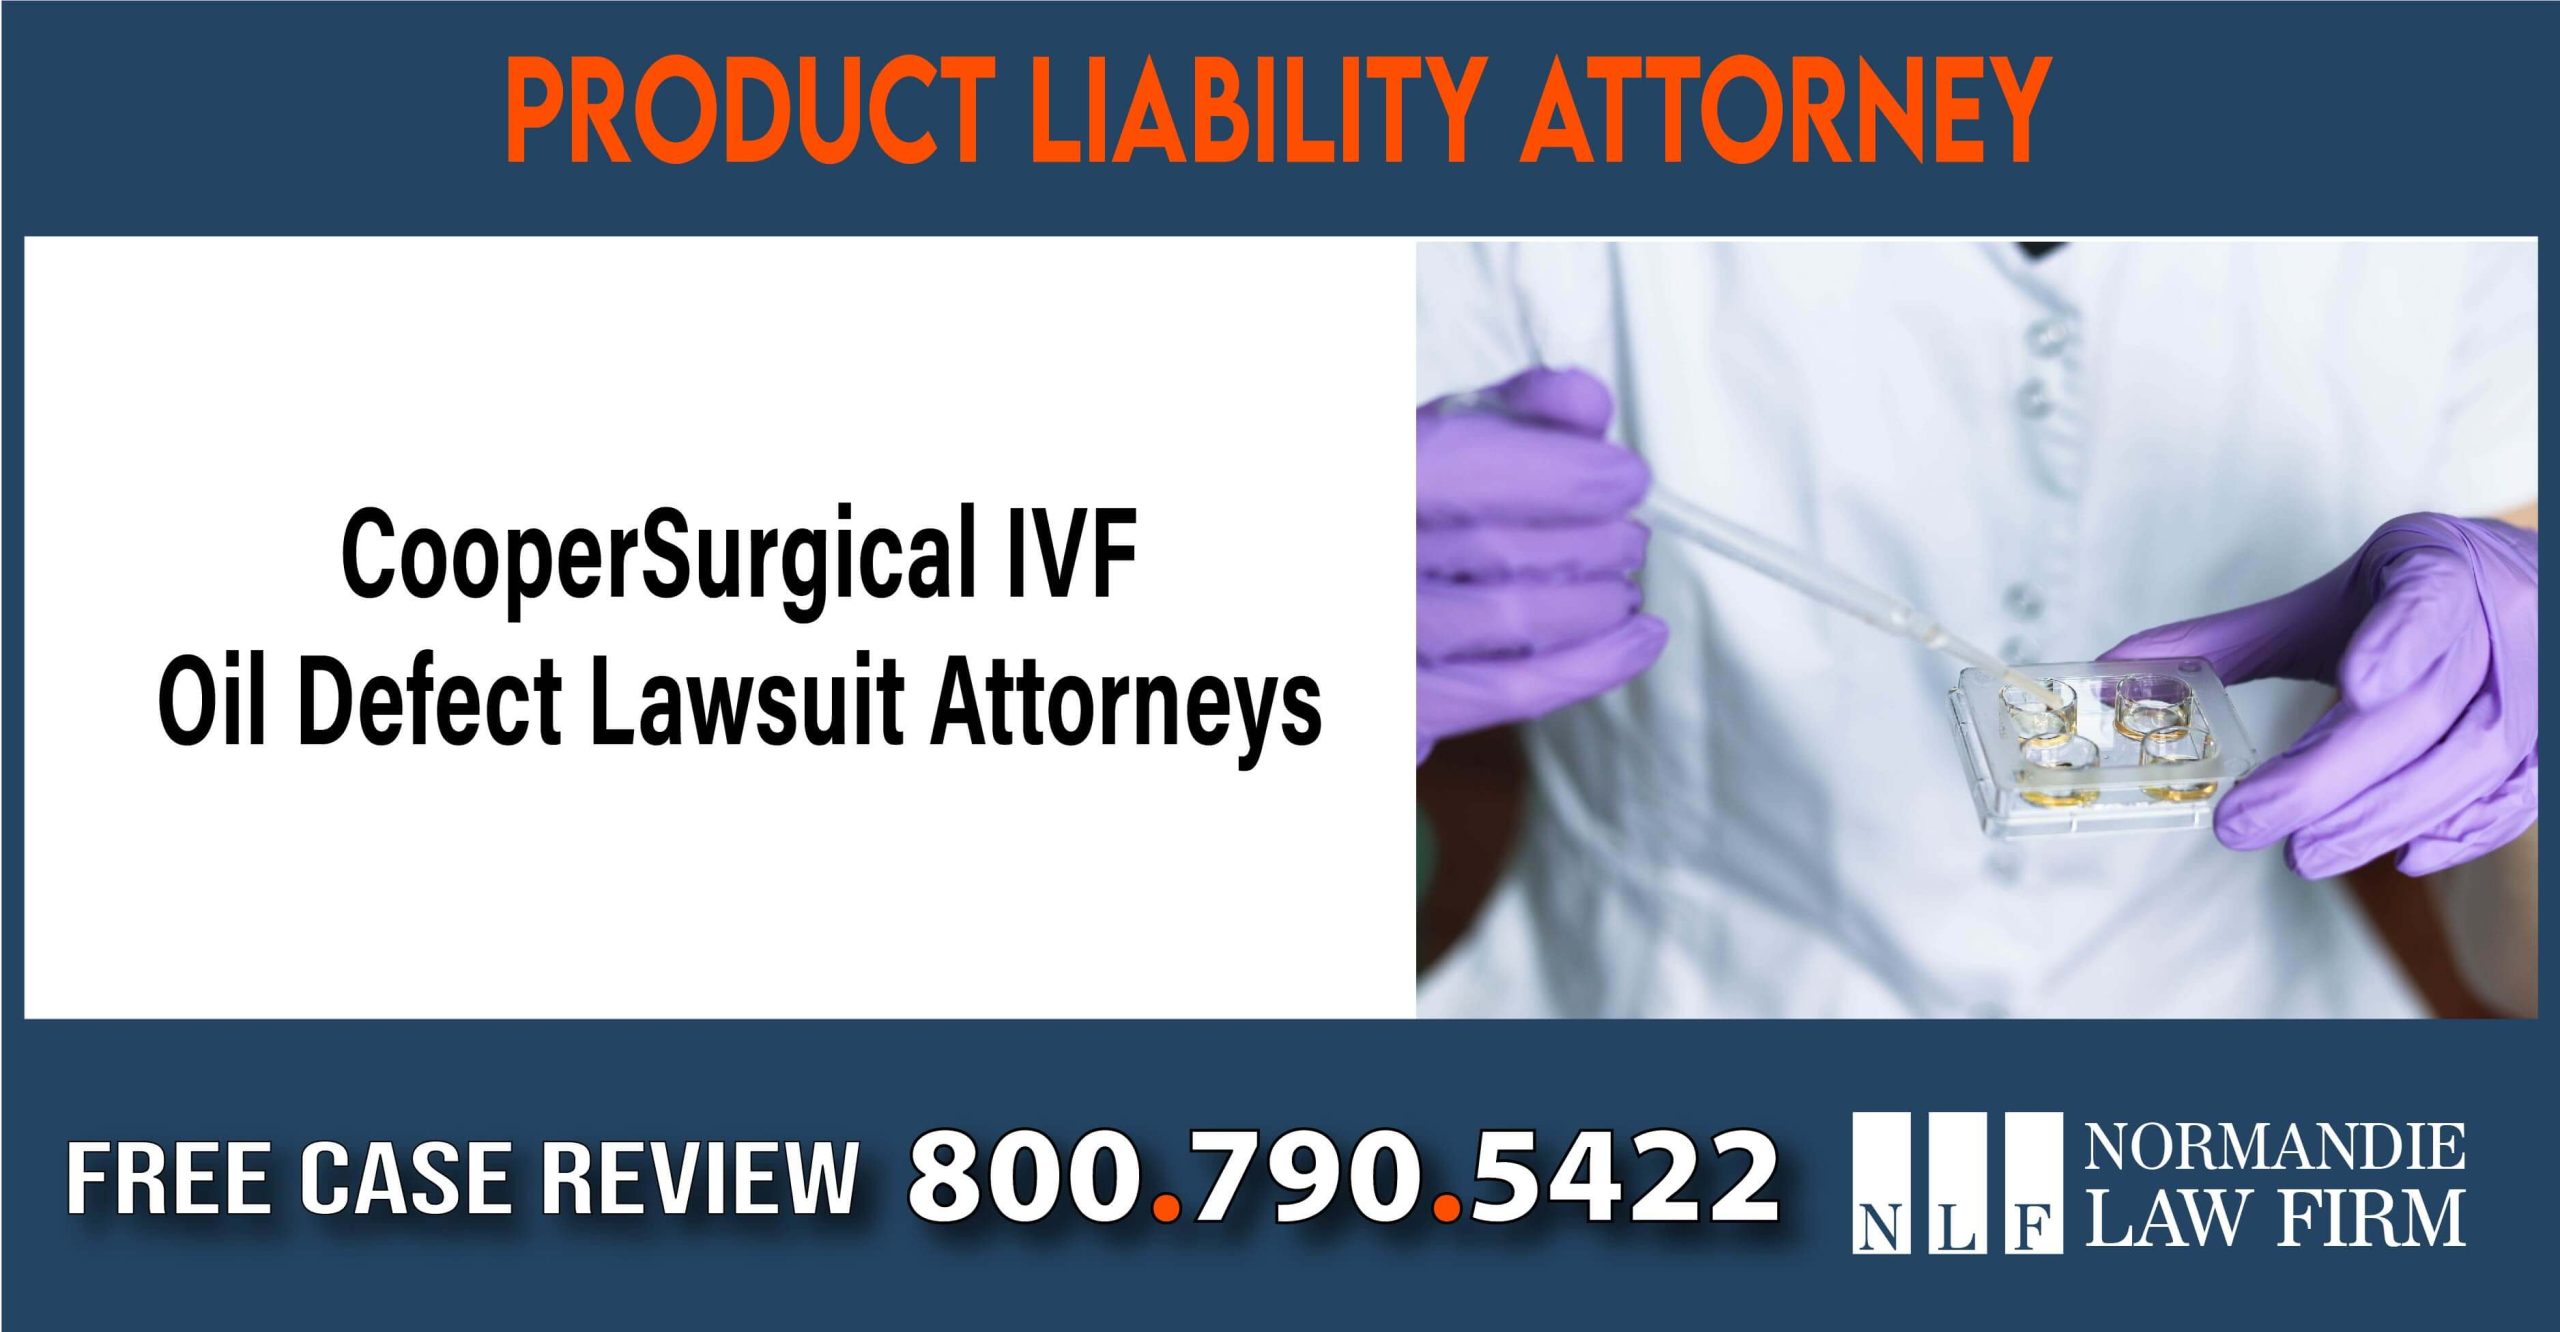 CooperSurgical IVF Oil Defect Lawsuit Attorneys recall liabilitty sue